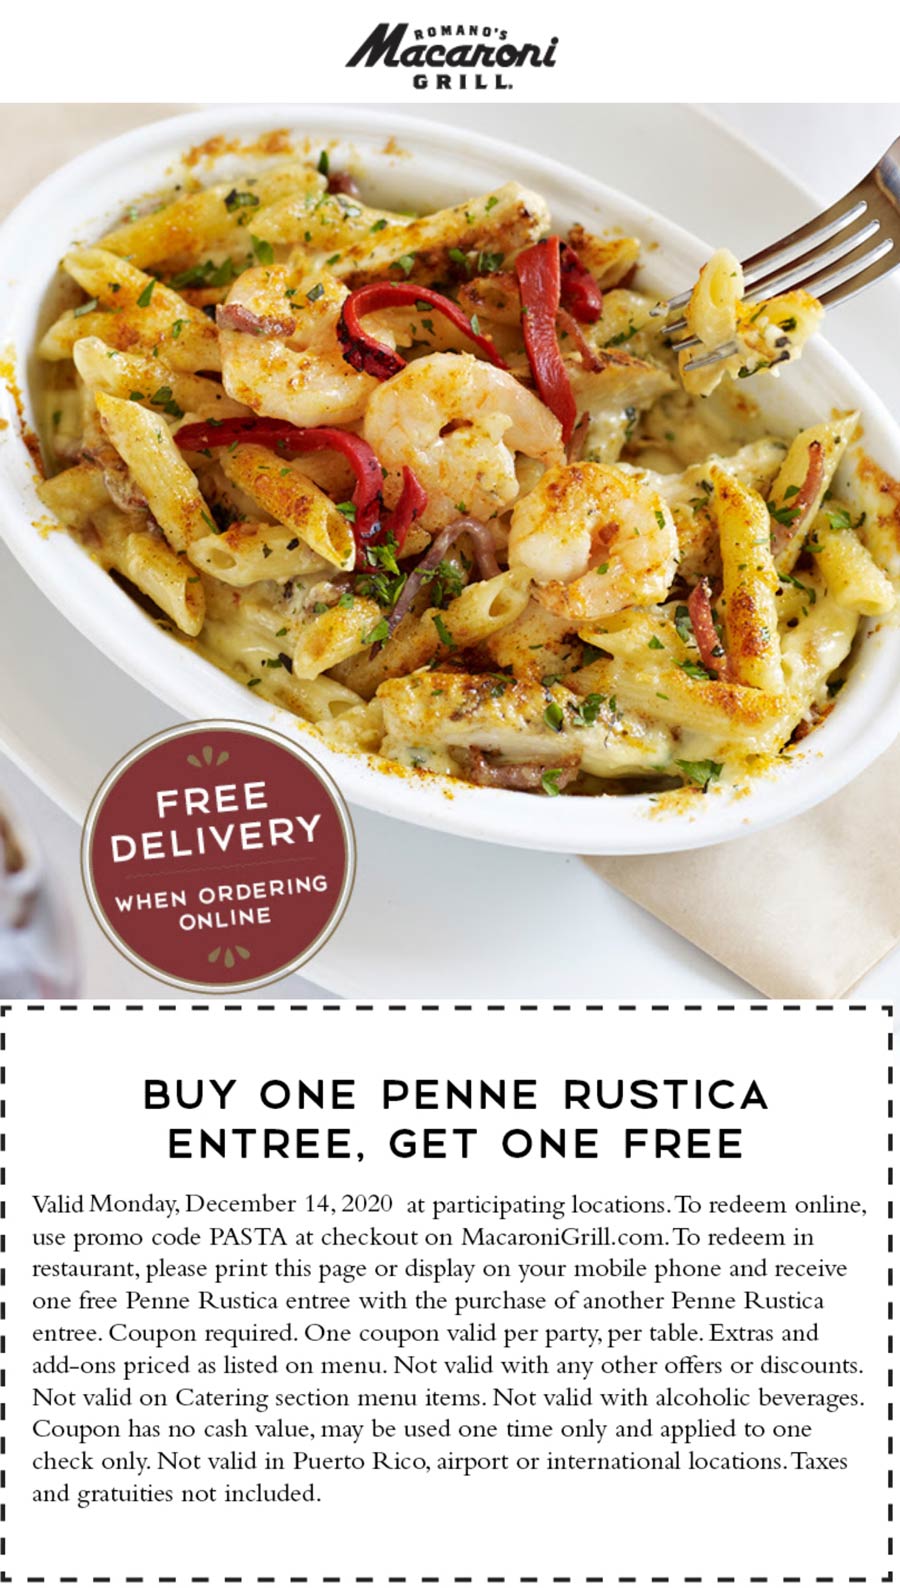 Macaroni Grill restaurants Coupon  Second penne rustica entree free today at Macaroni Grill via promo code PASTA #macaronigrill 